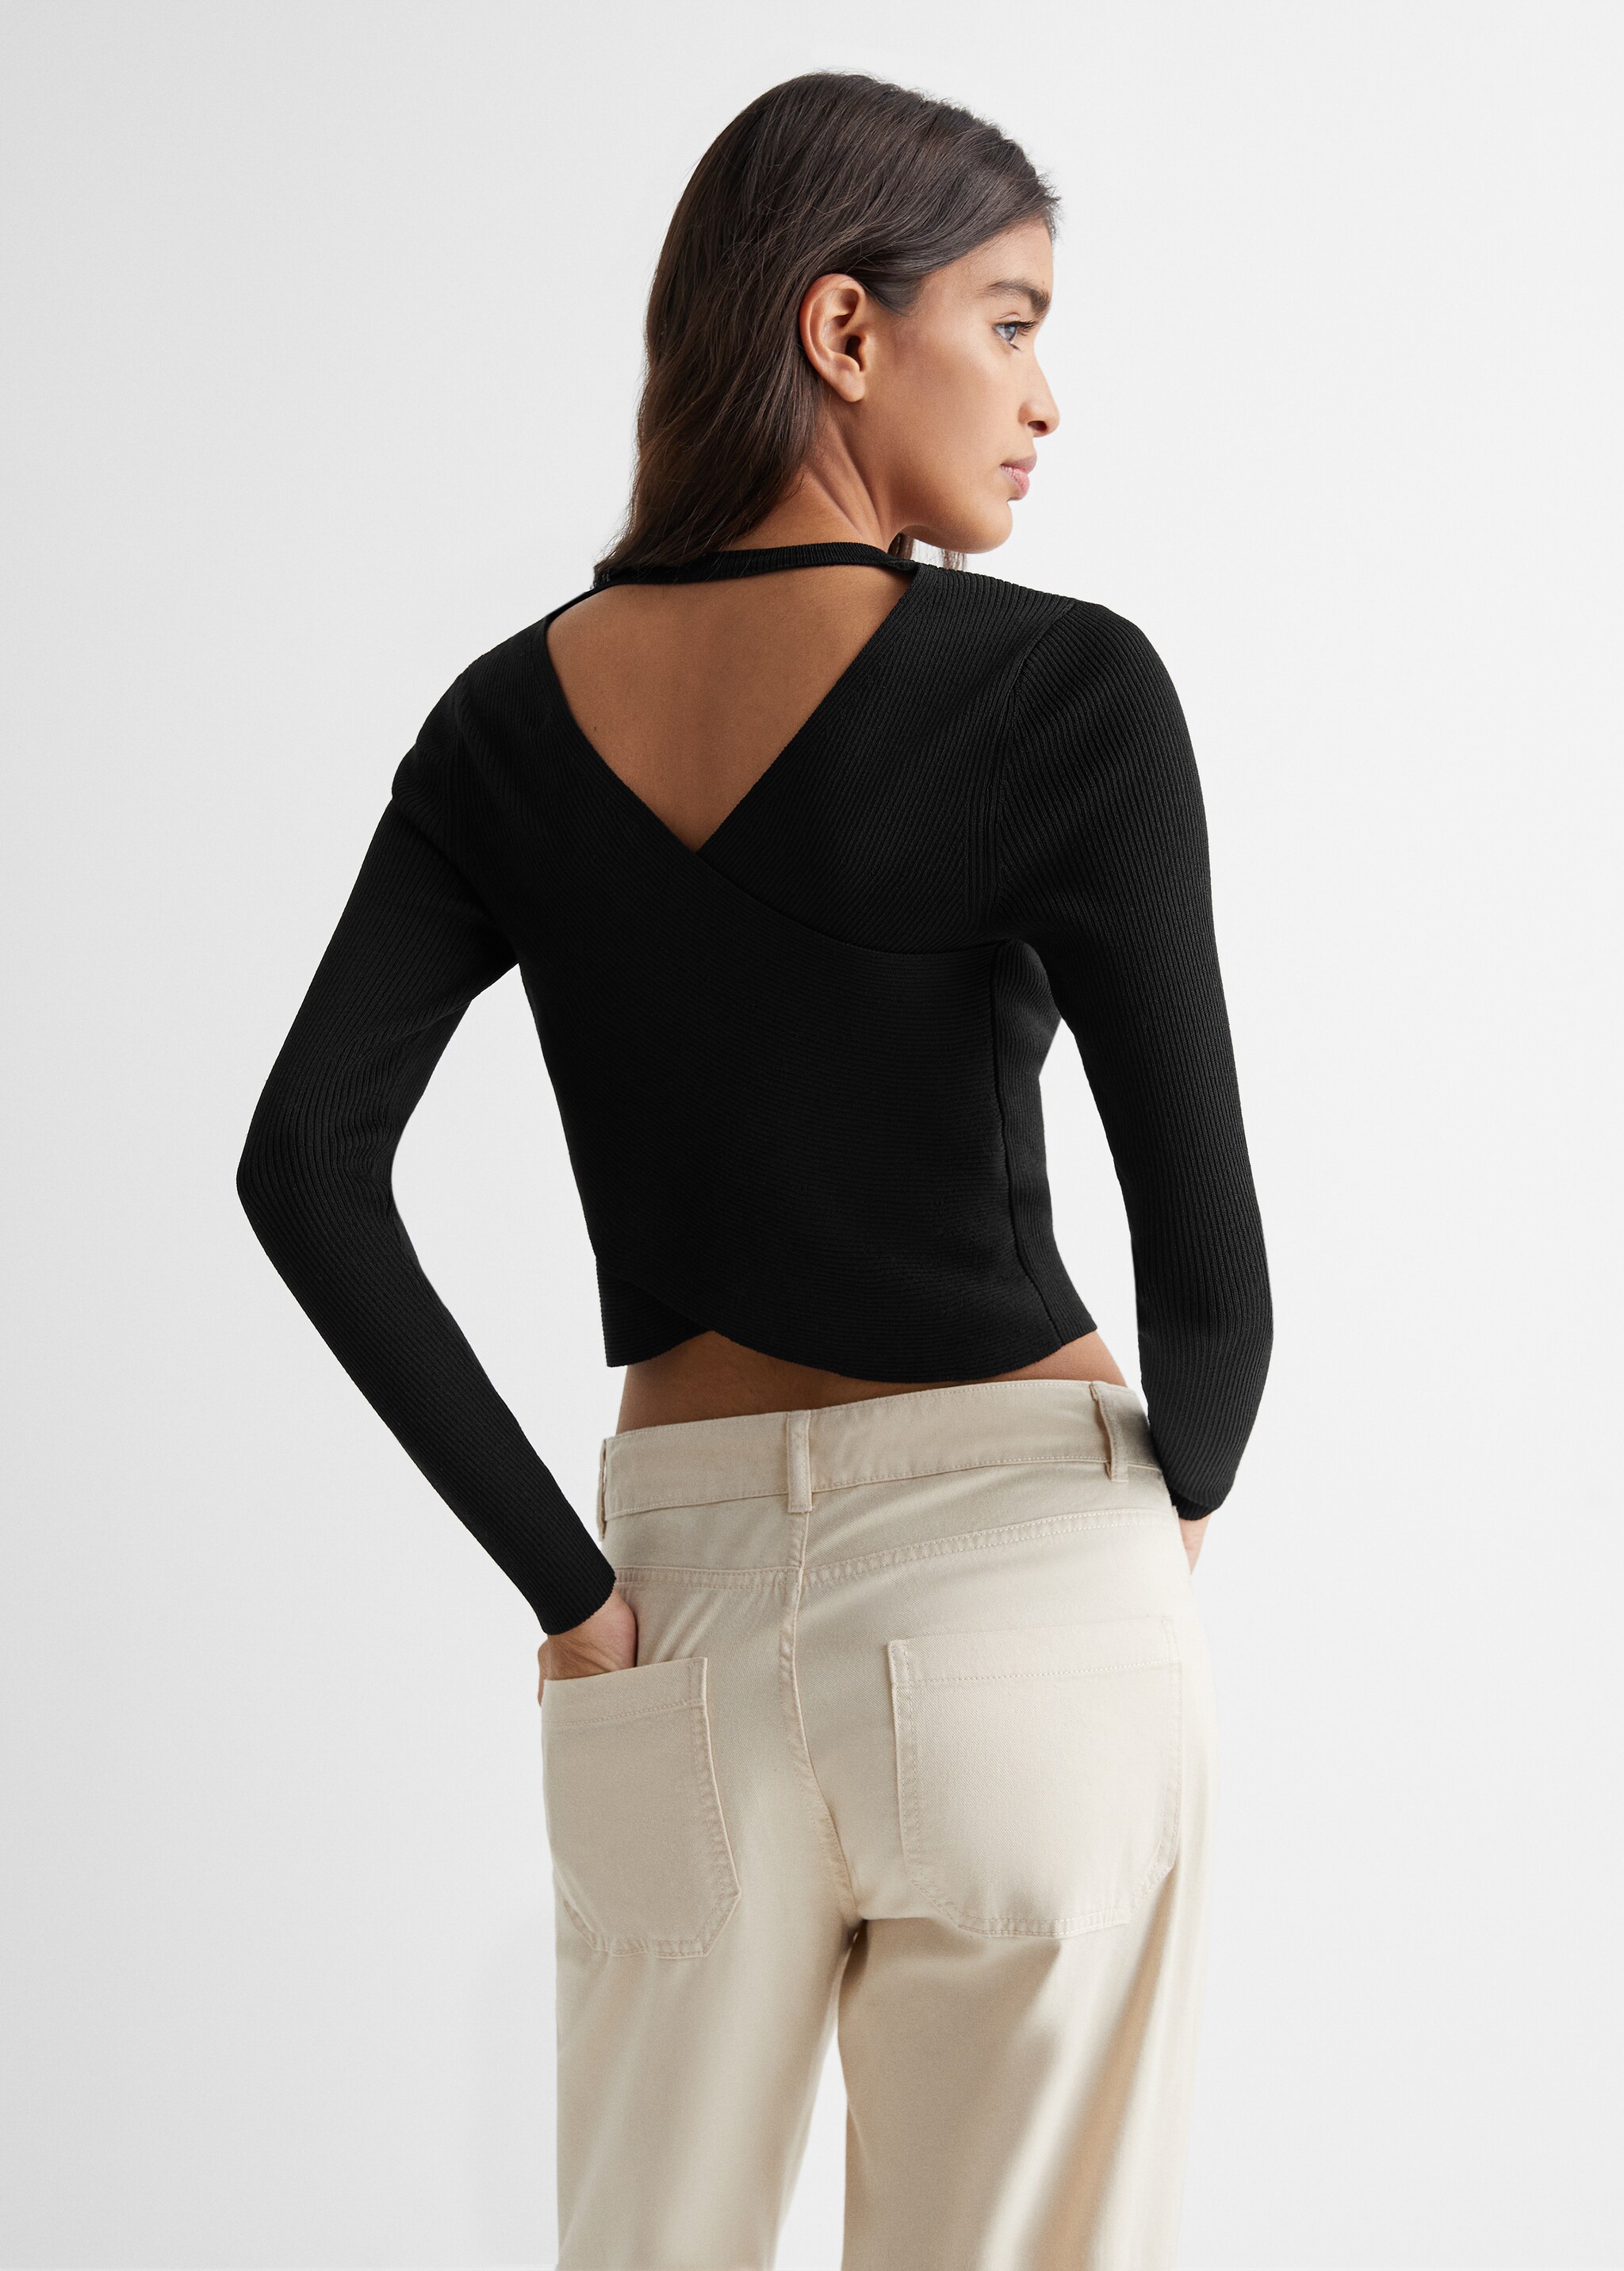 Pull-over maille ouvertures - Verso de l’article